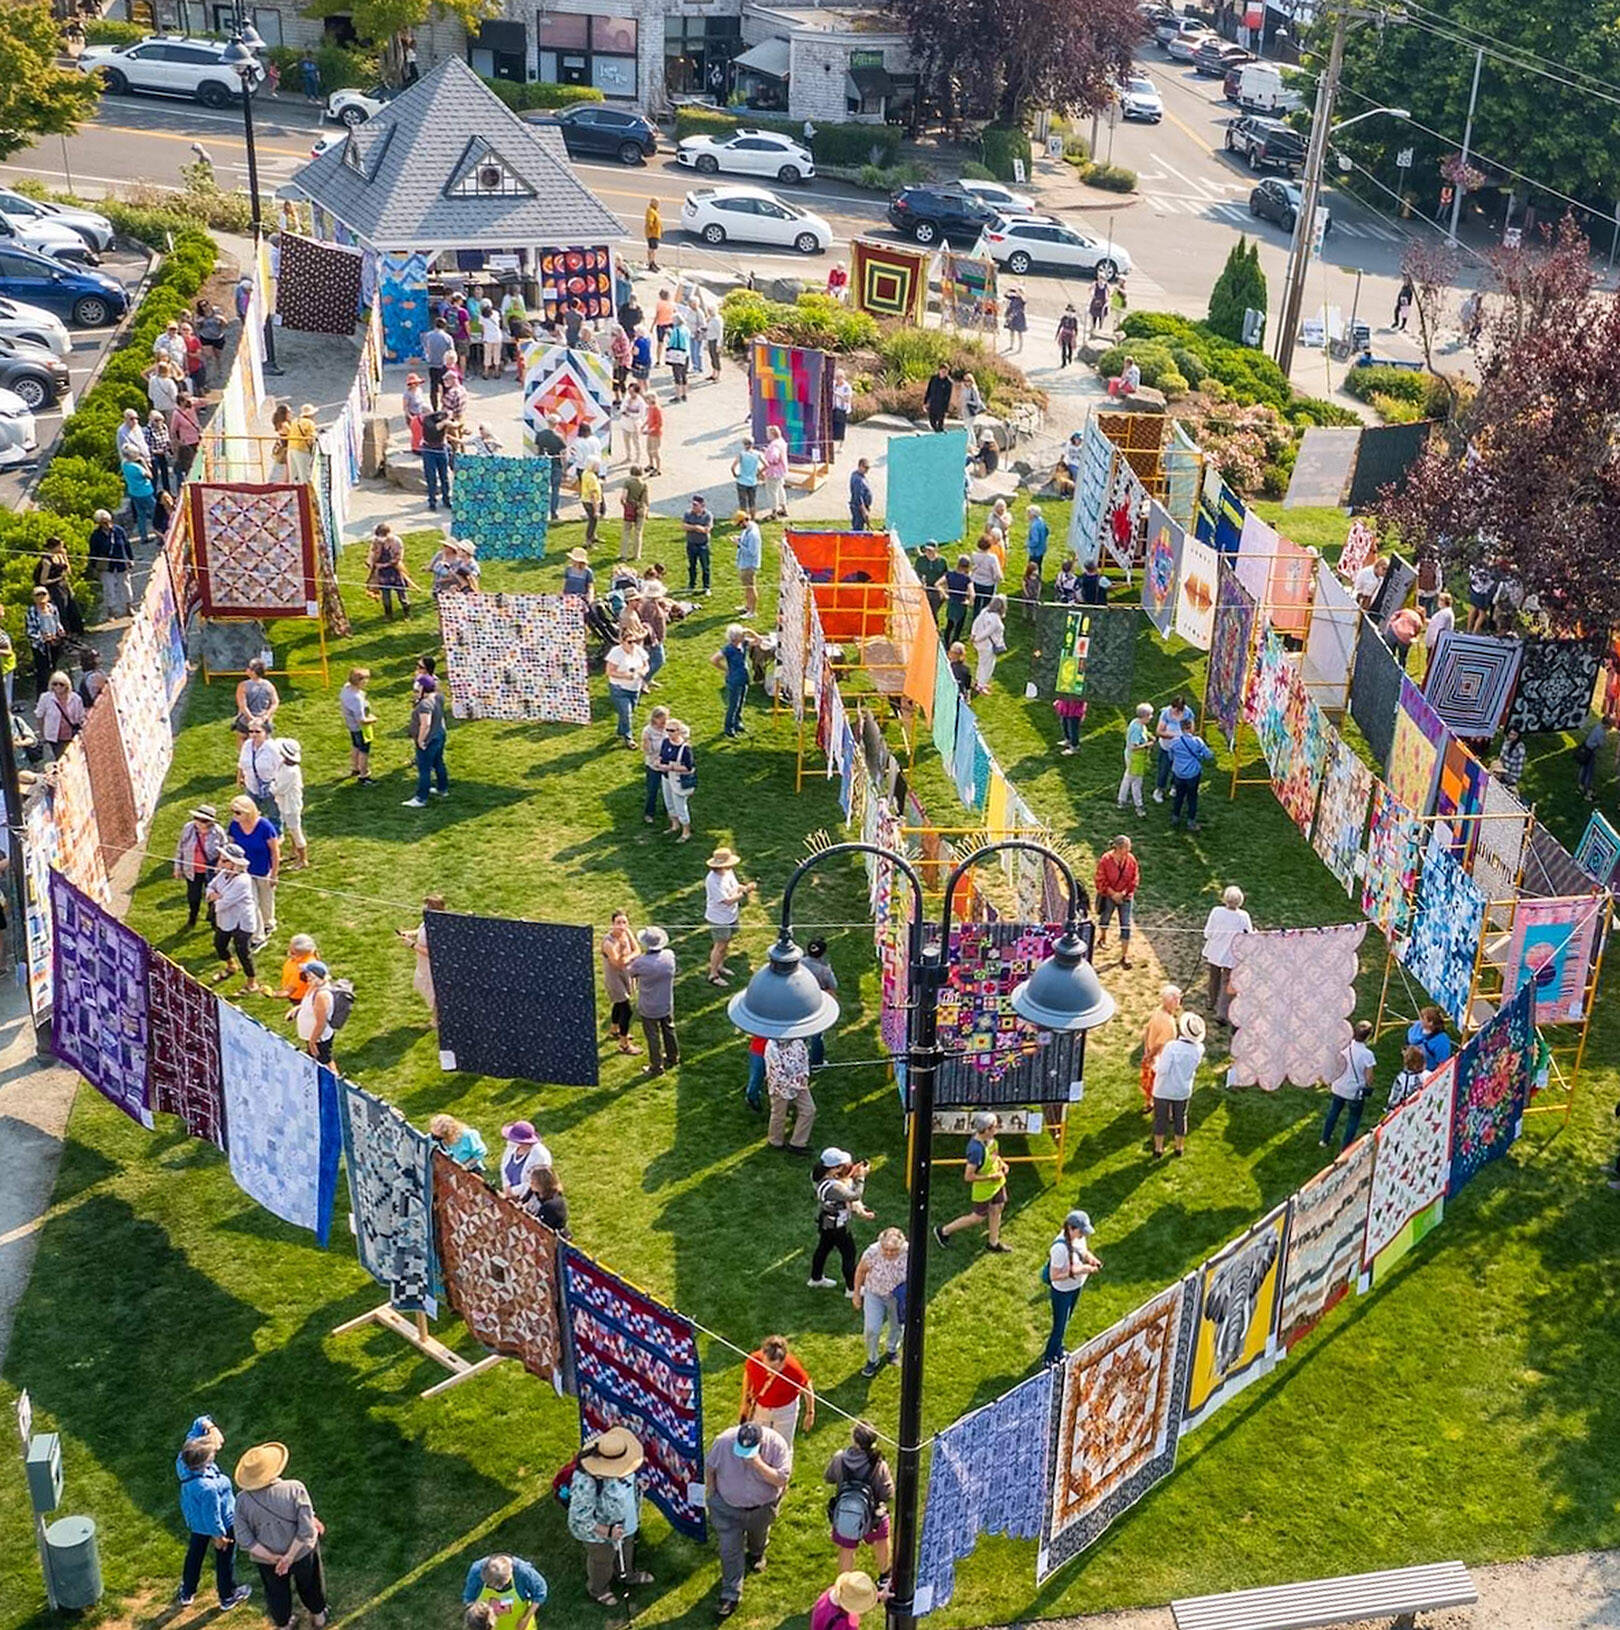 Quilt enthusiasts flock to Extension service for annual show, Local News